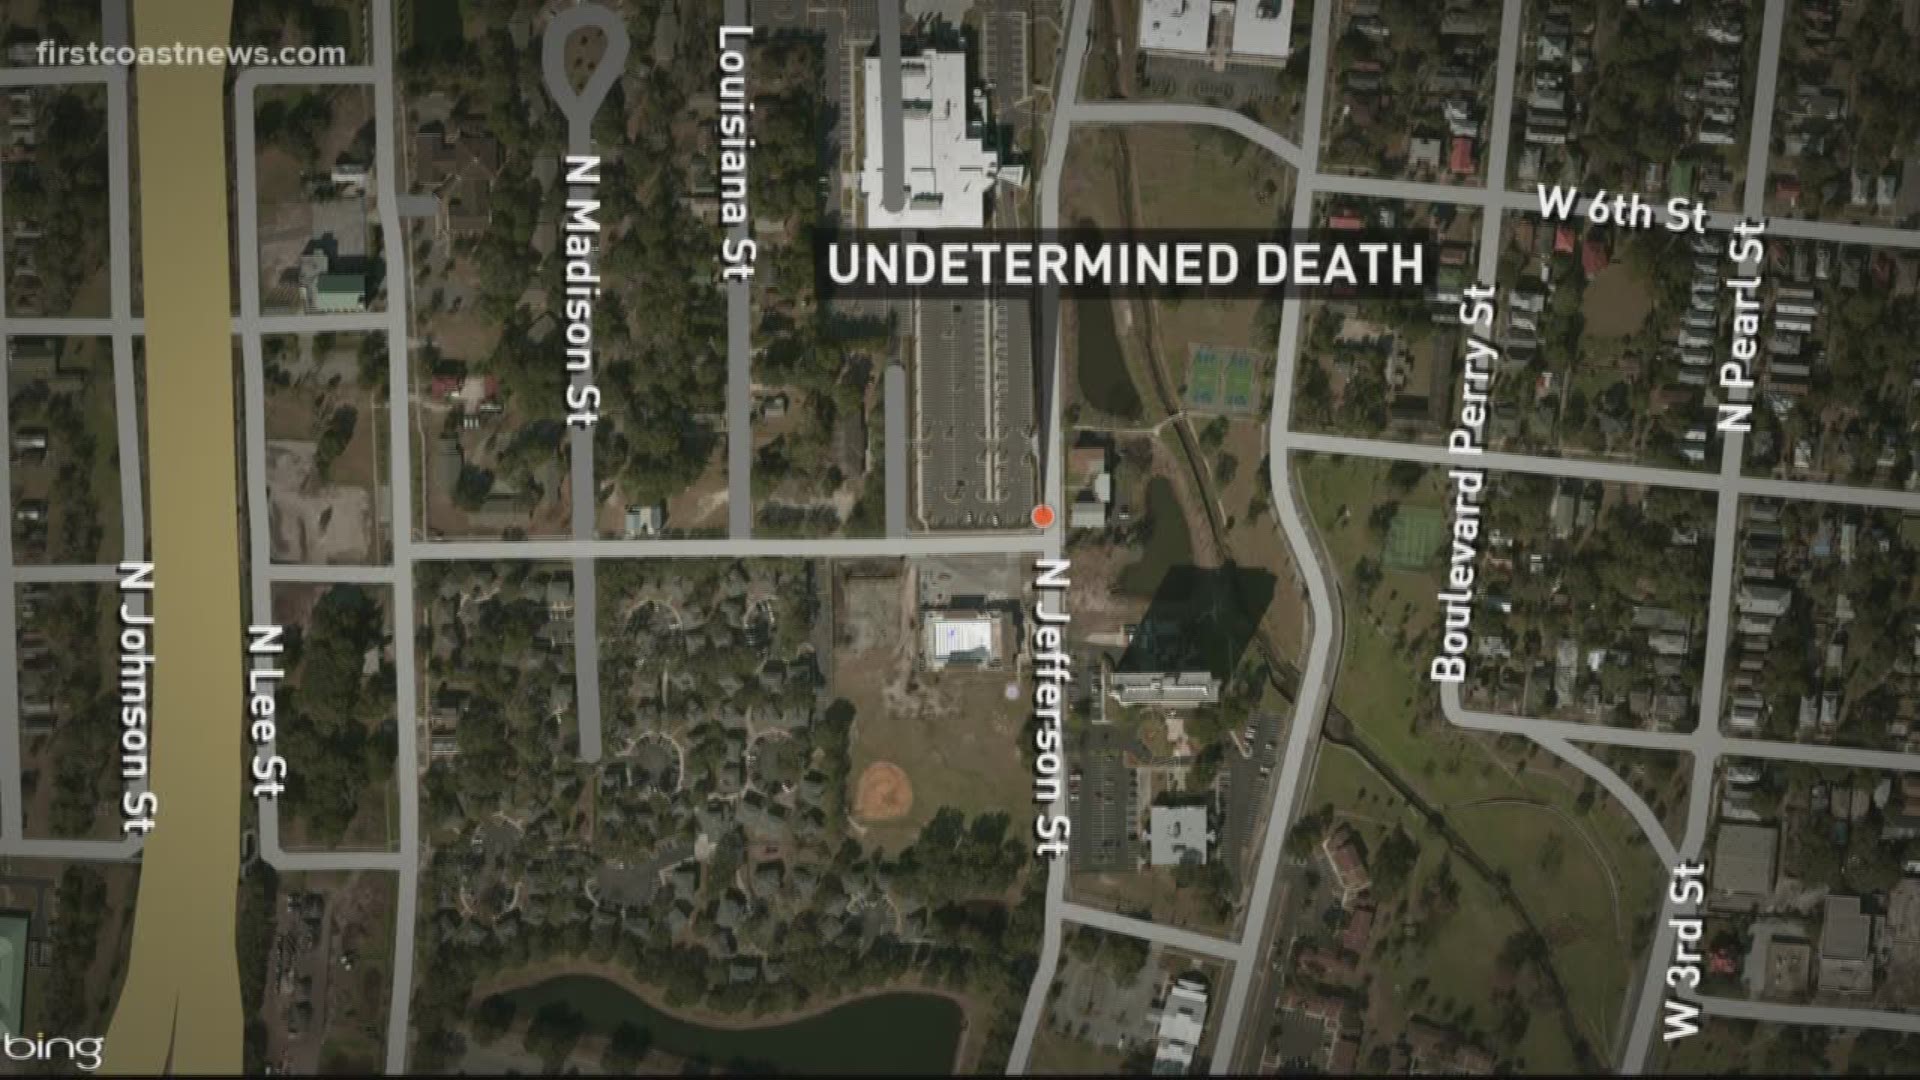 The Jacksonville Sheriff's Office has responded to an undetermined death near the downtown area.